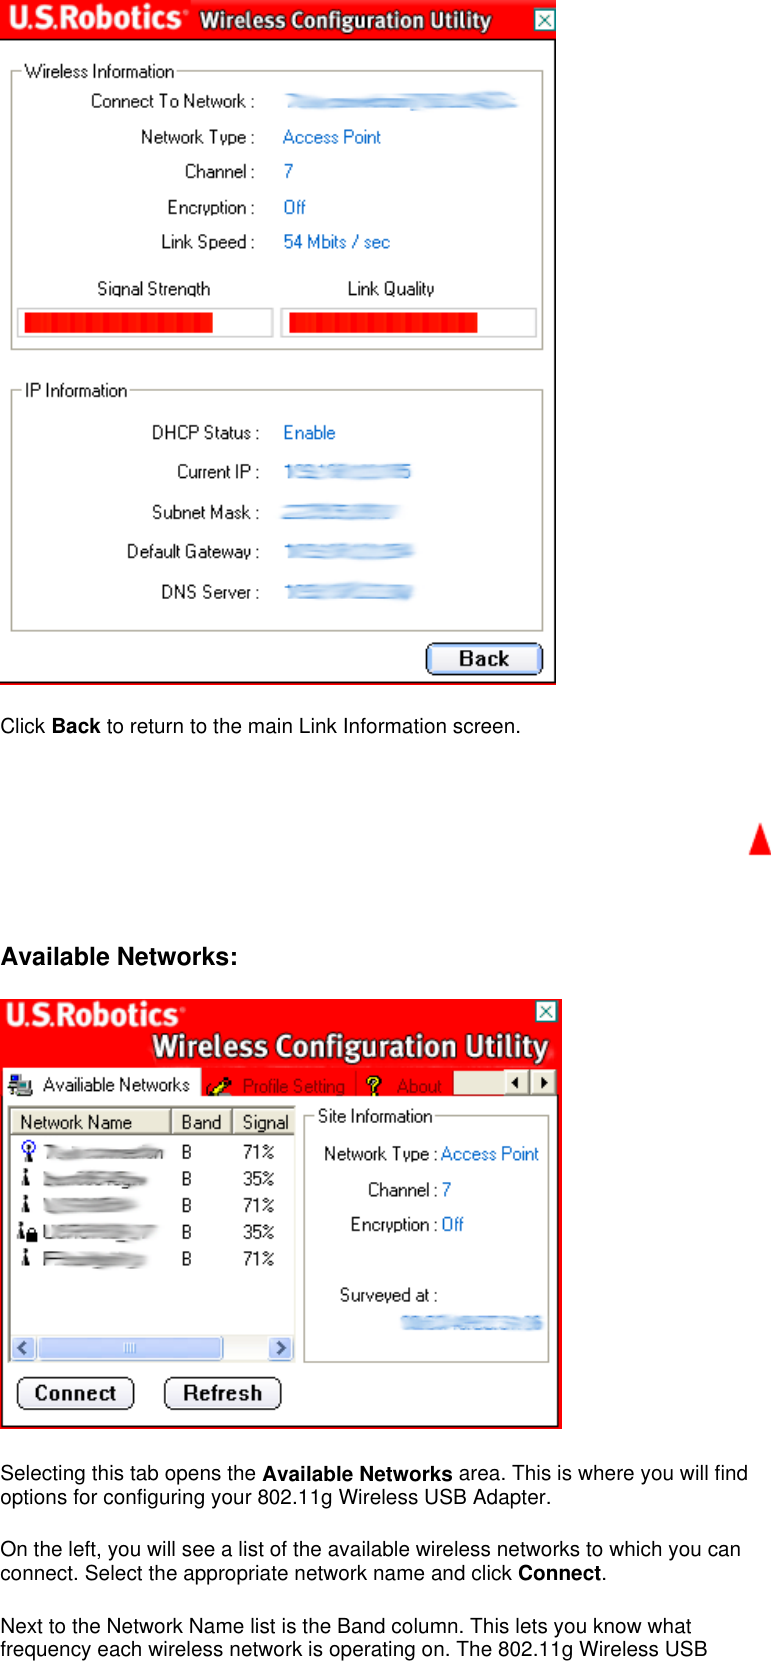  Click Back to return to the main Link Information screen.     Available Networks:    Selecting this tab opens the Available Networks area. This is where you will find options for configuring your 802.11g Wireless USB Adapter.  On the left, you will see a list of the available wireless networks to which you can connect. Select the appropriate network name and click Connect.  Next to the Network Name list is the Band column. This lets you know what frequency each wireless network is operating on. The 802.11g Wireless USB 